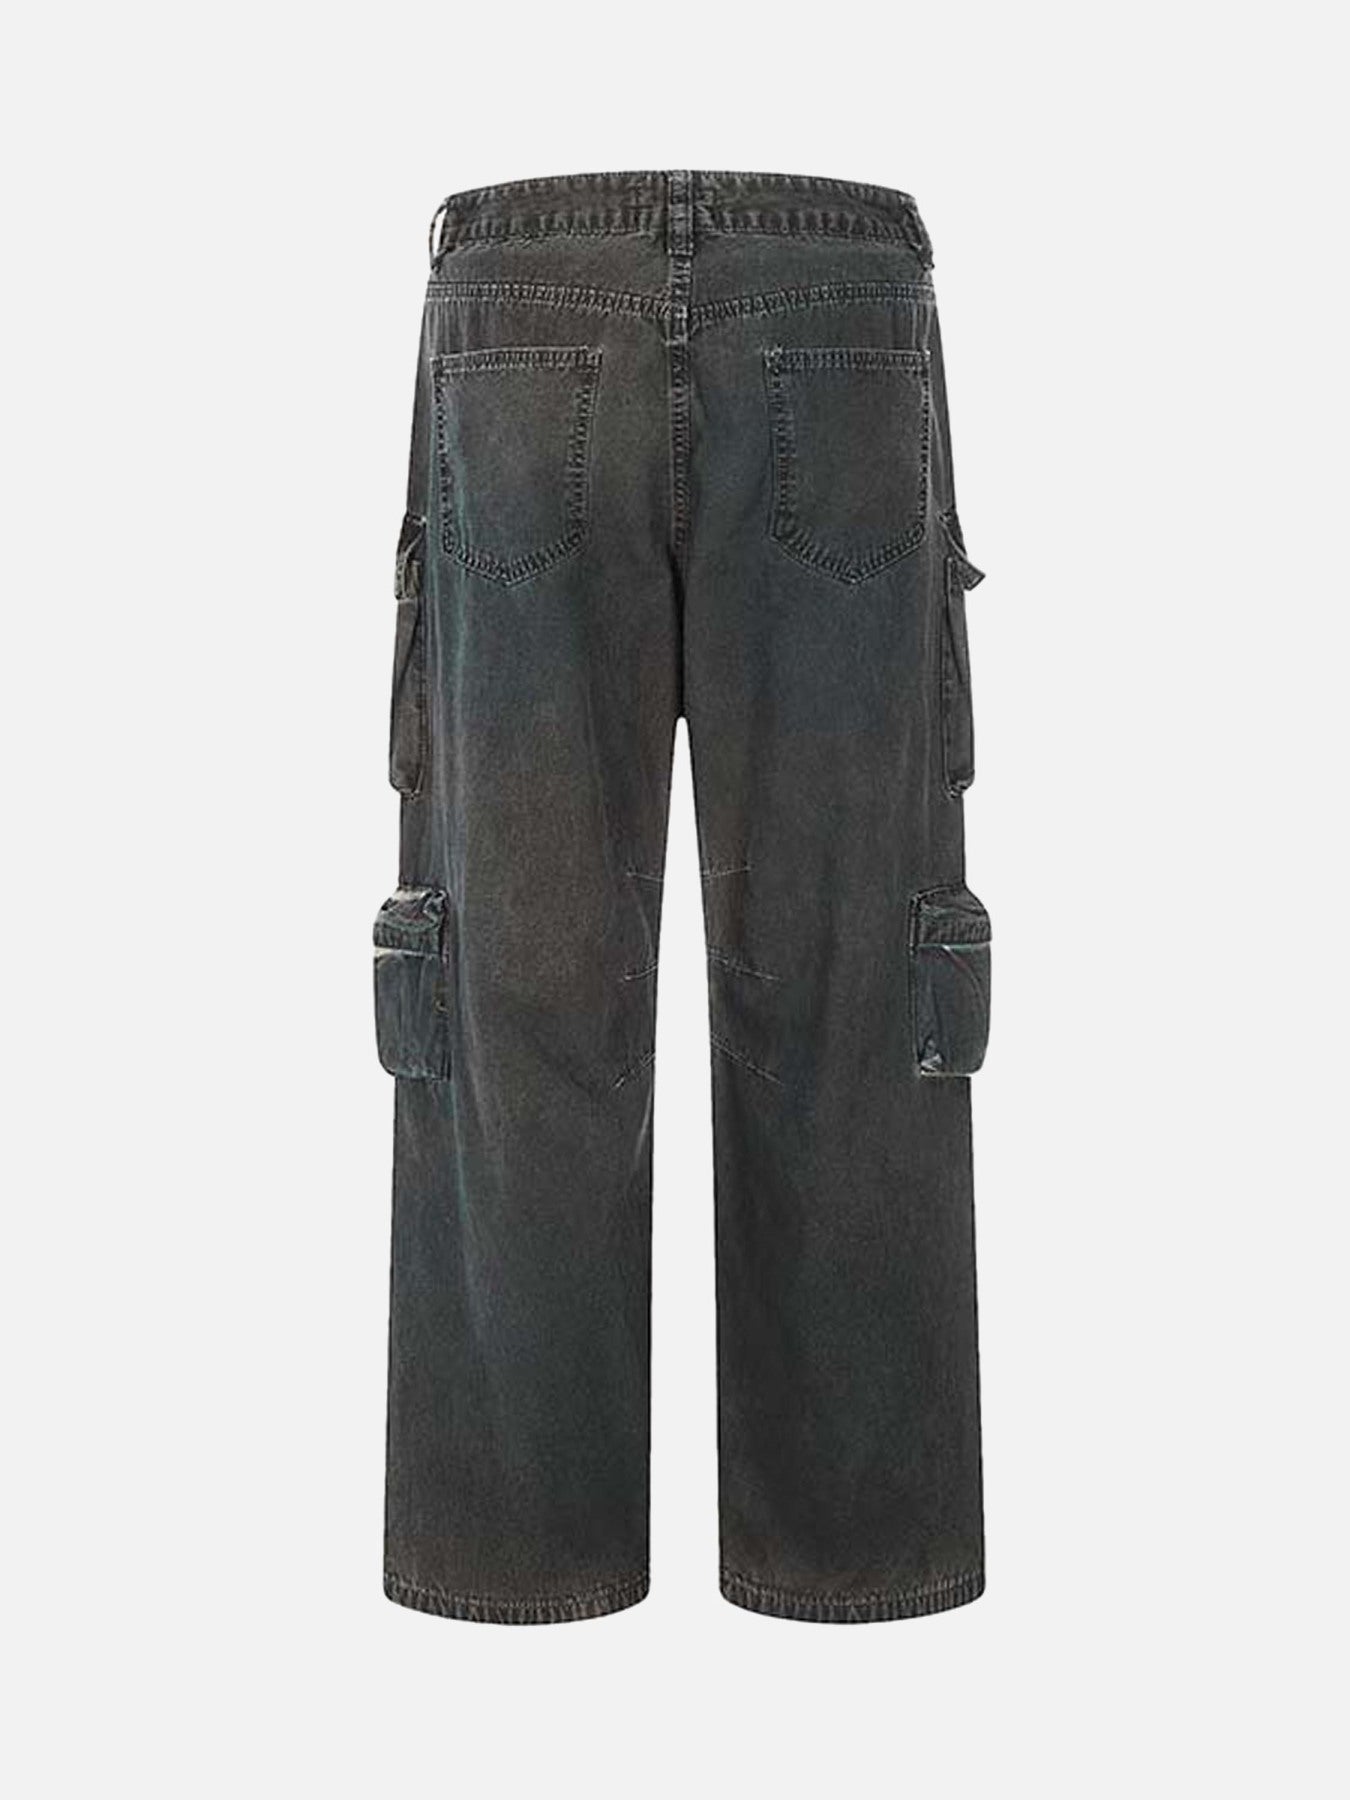 The Supermade Washed And Aged Tie-dye Multi-pocket Denim Work Pants